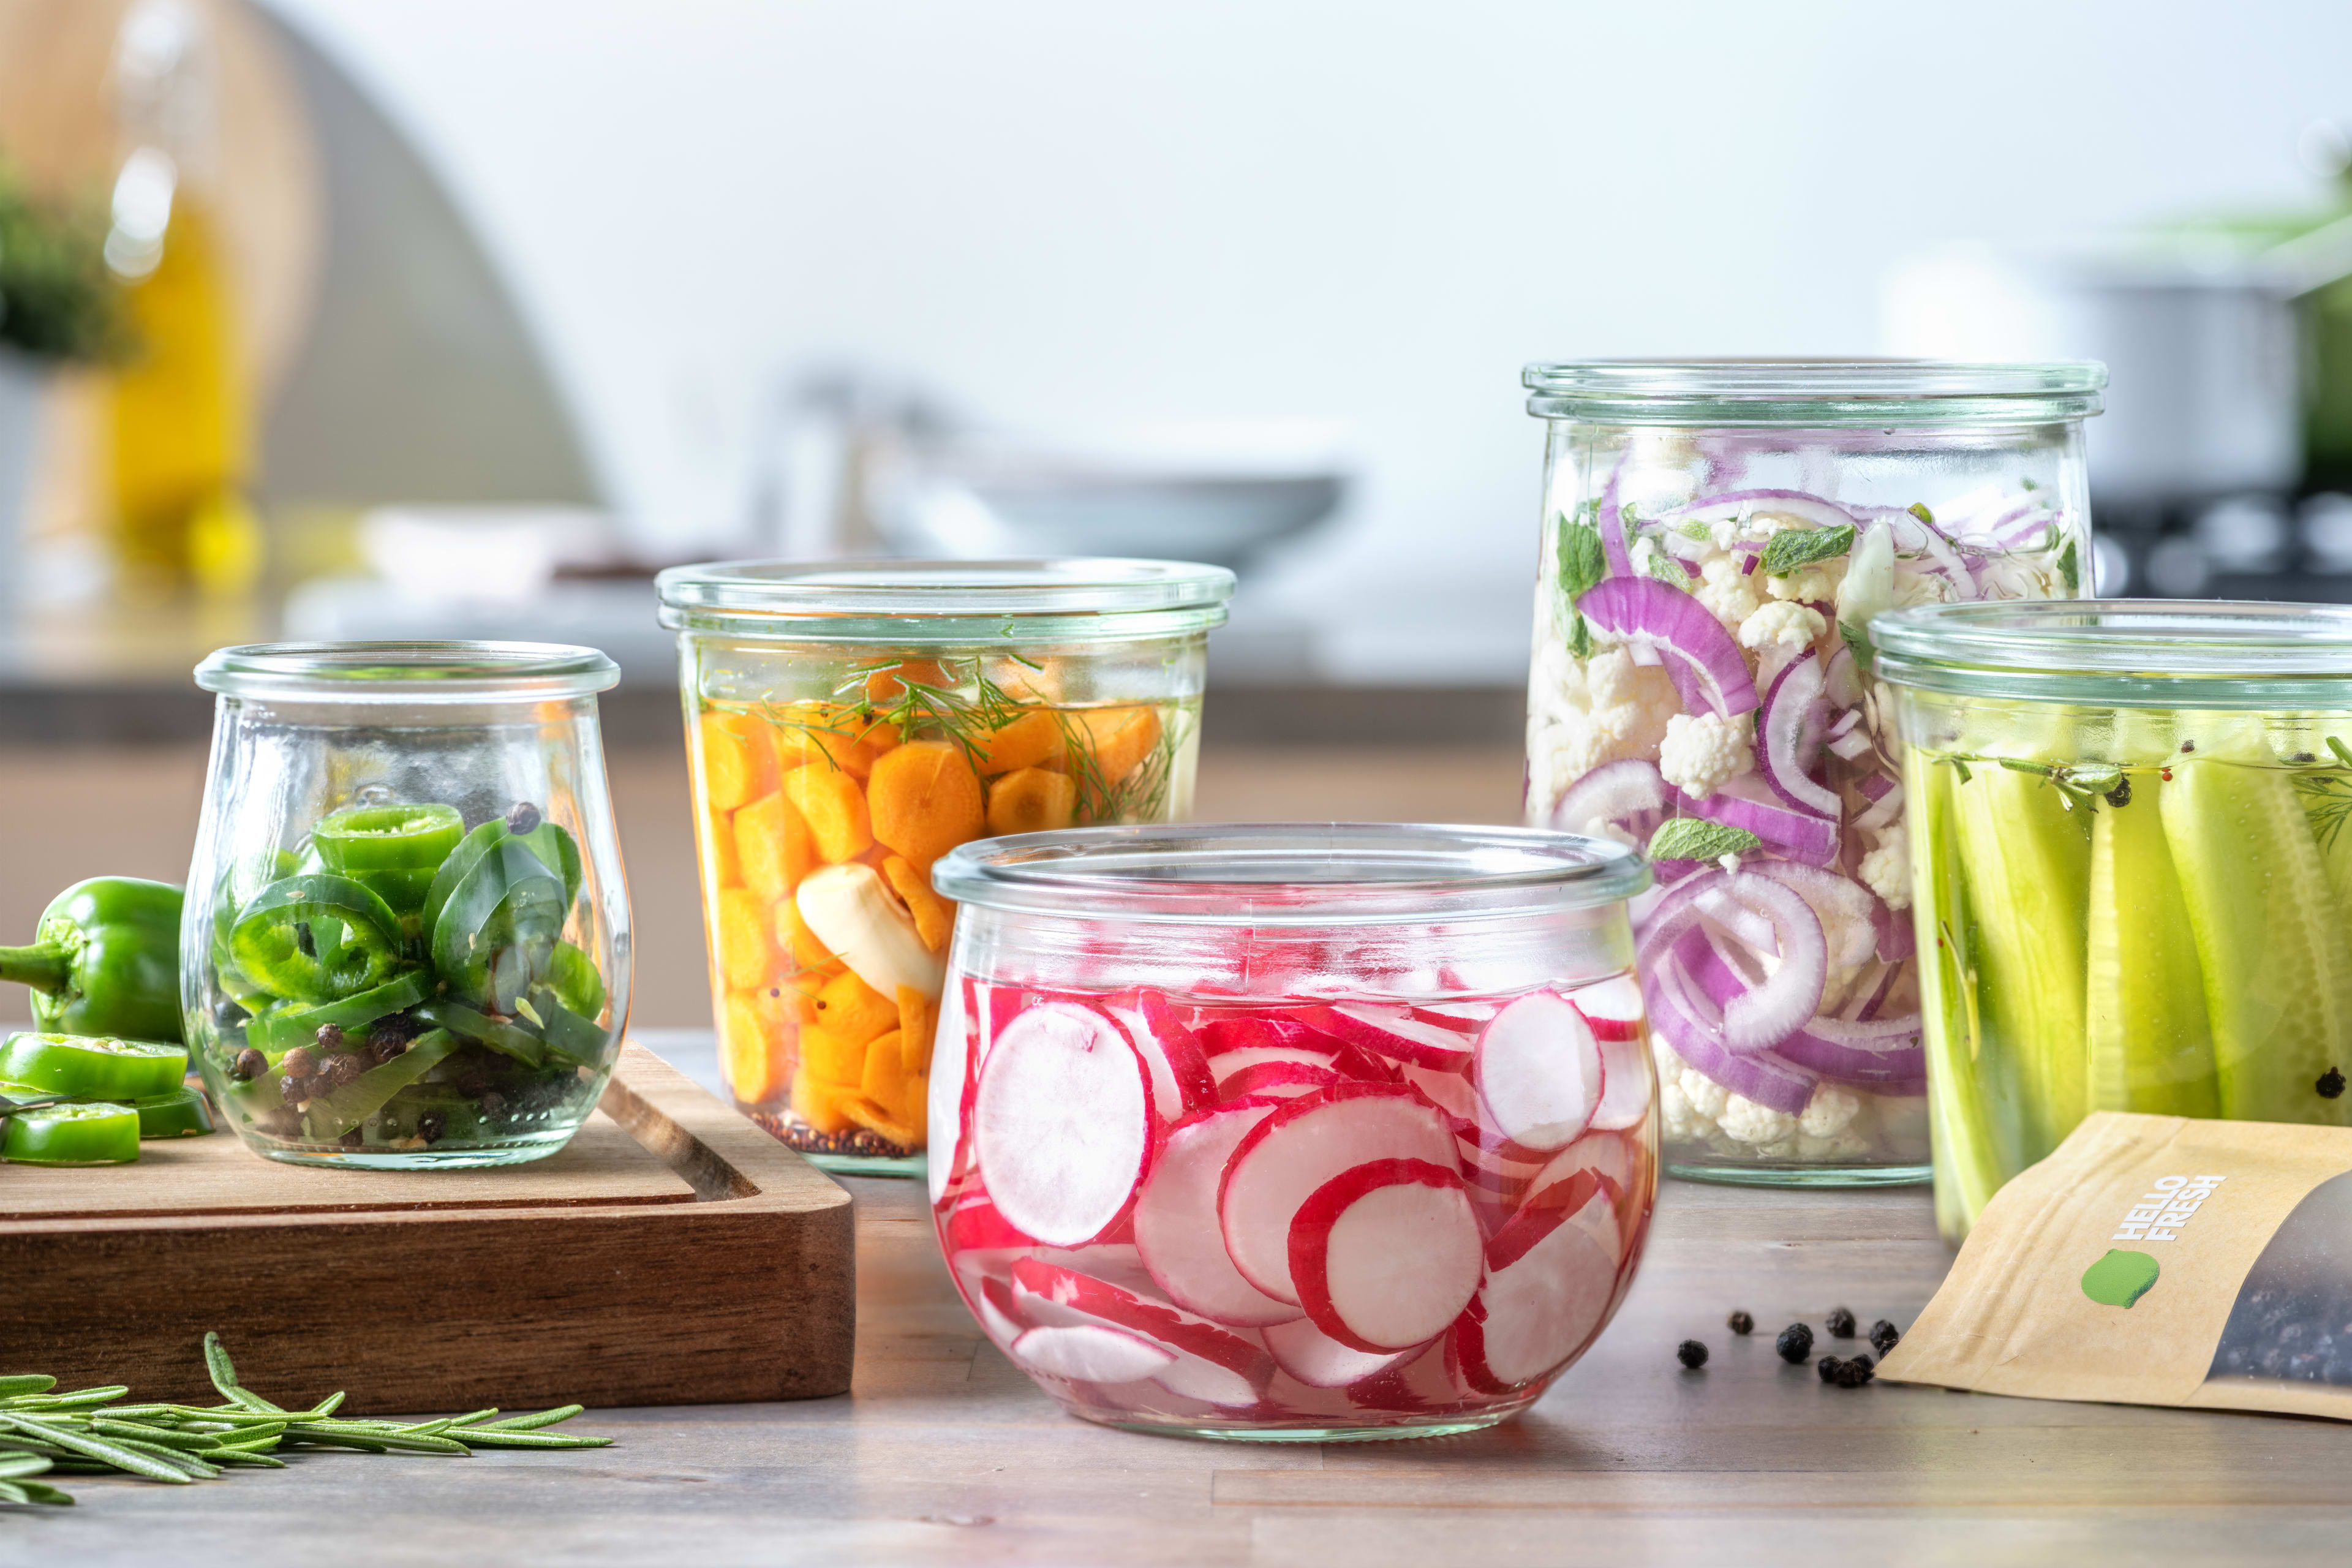 How to pickle/ferment at home